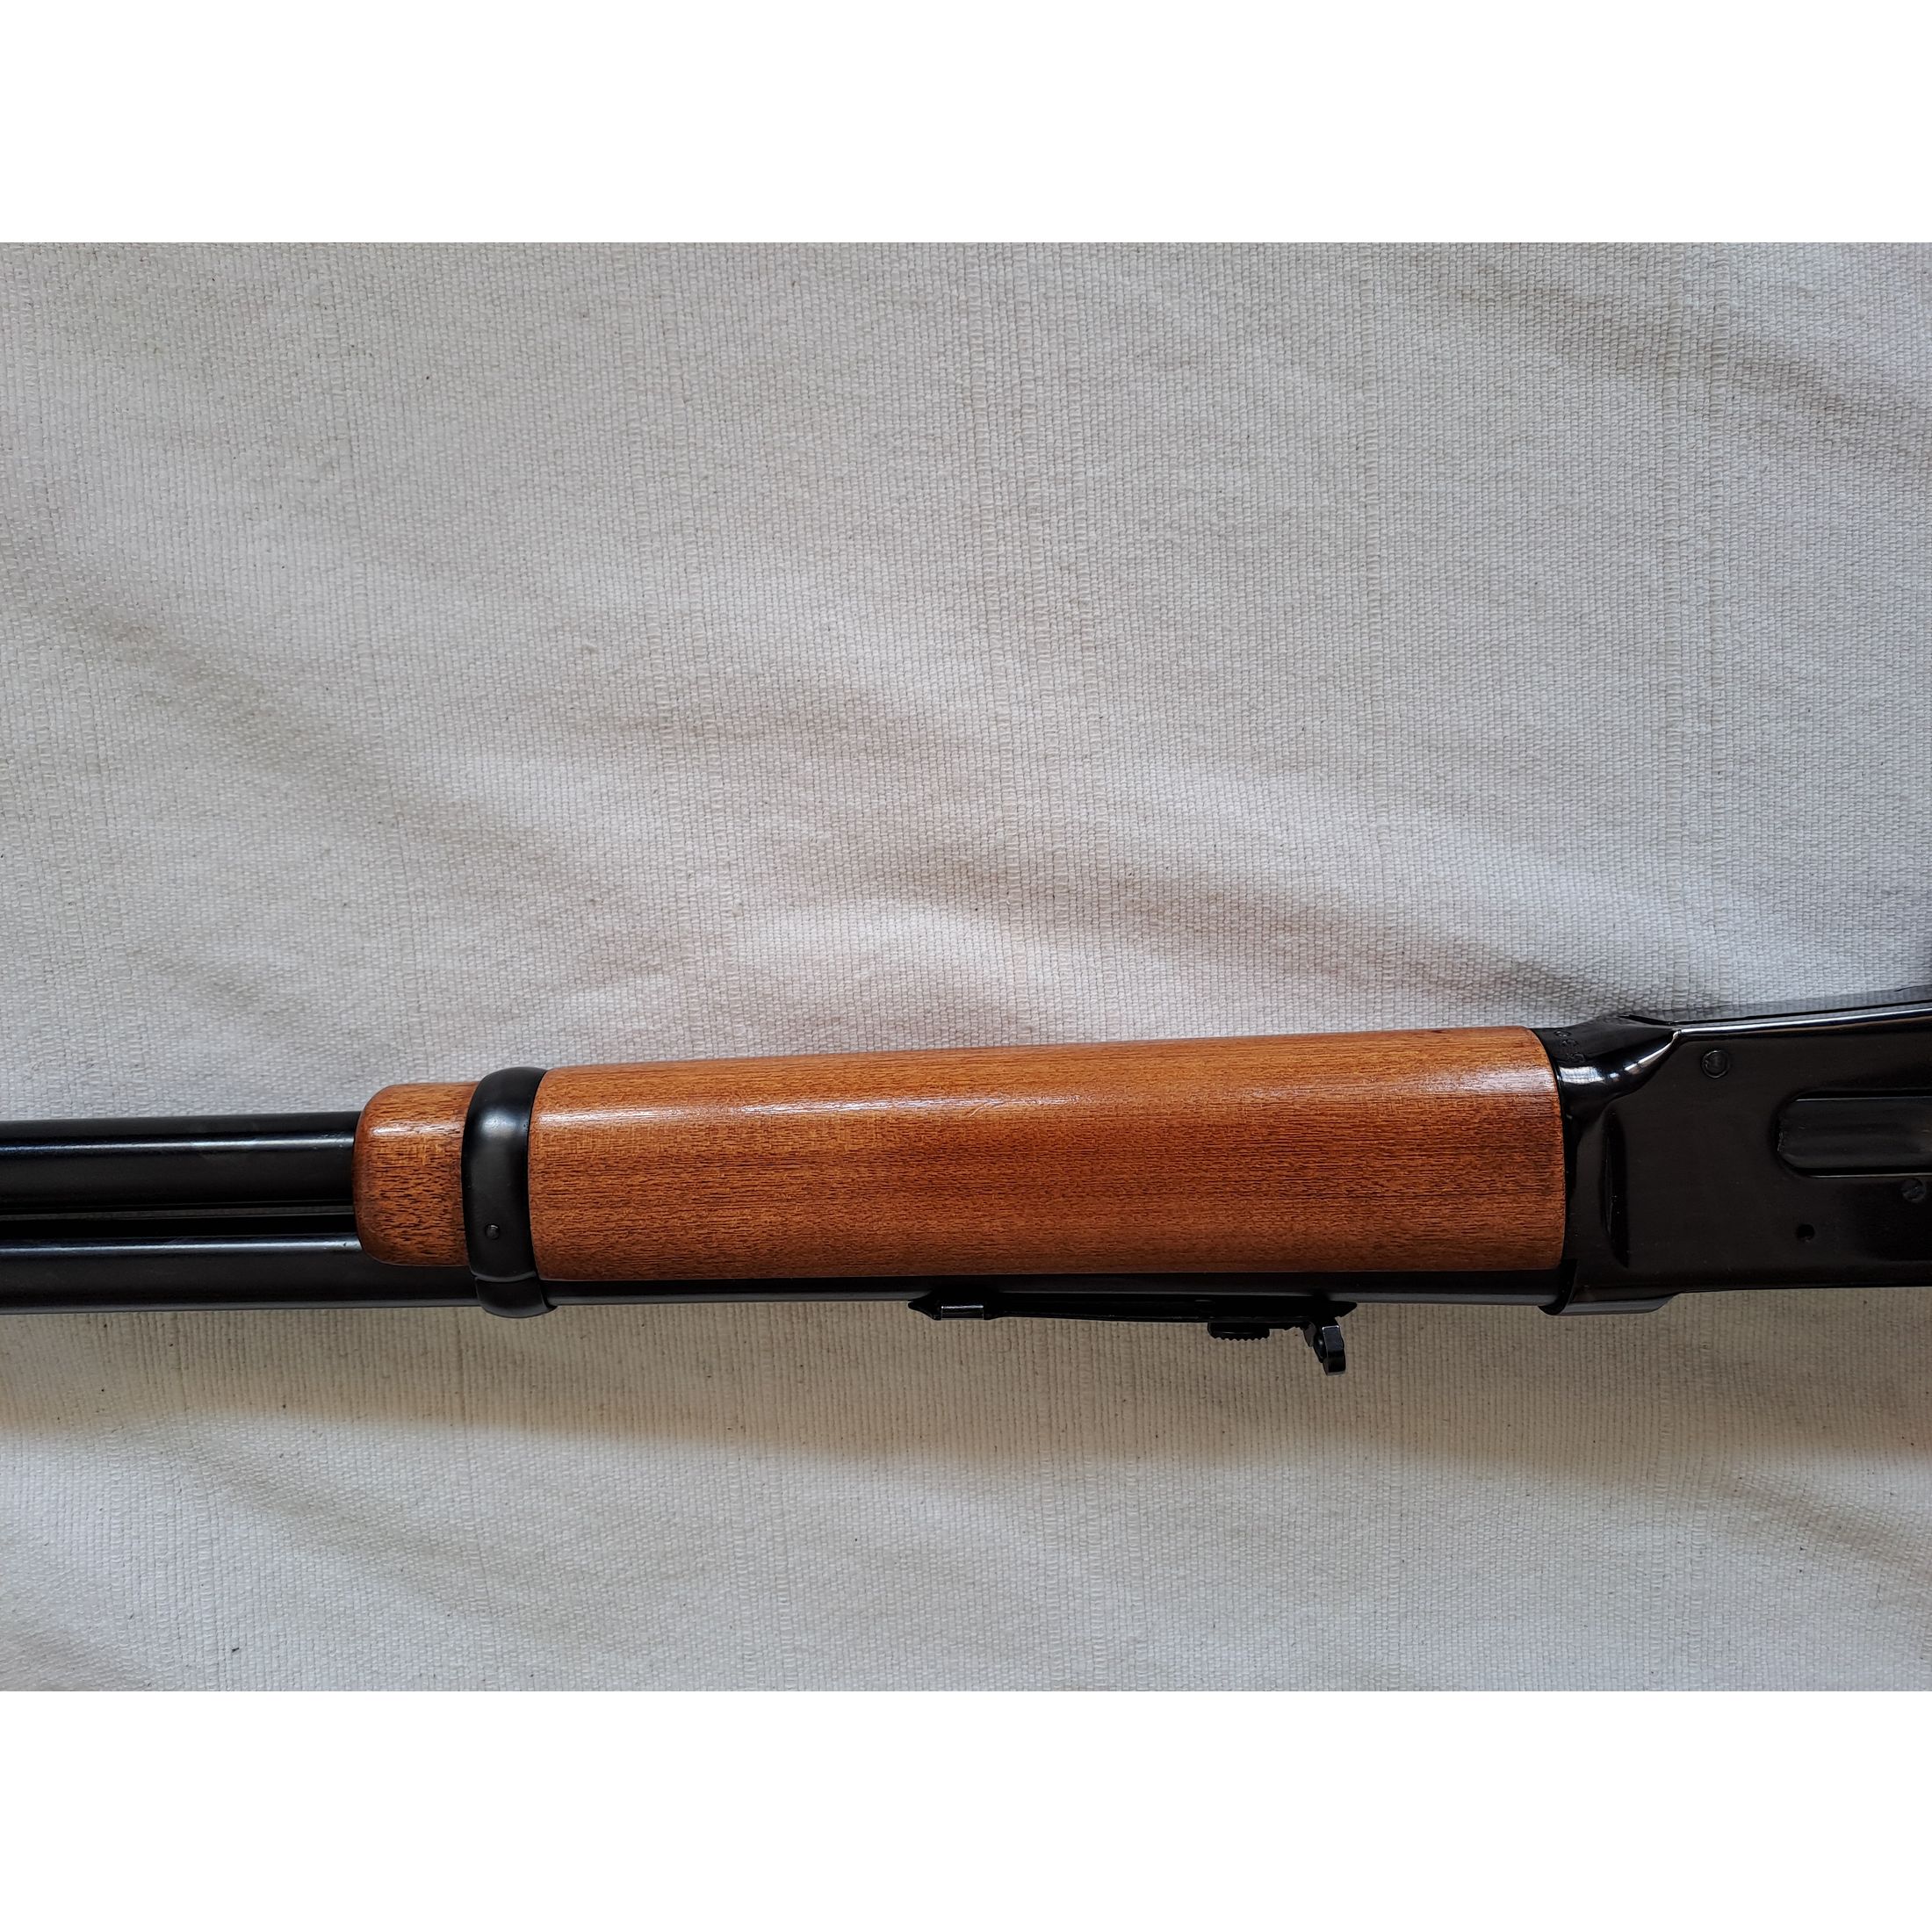 Winchester 1894 44.Mag